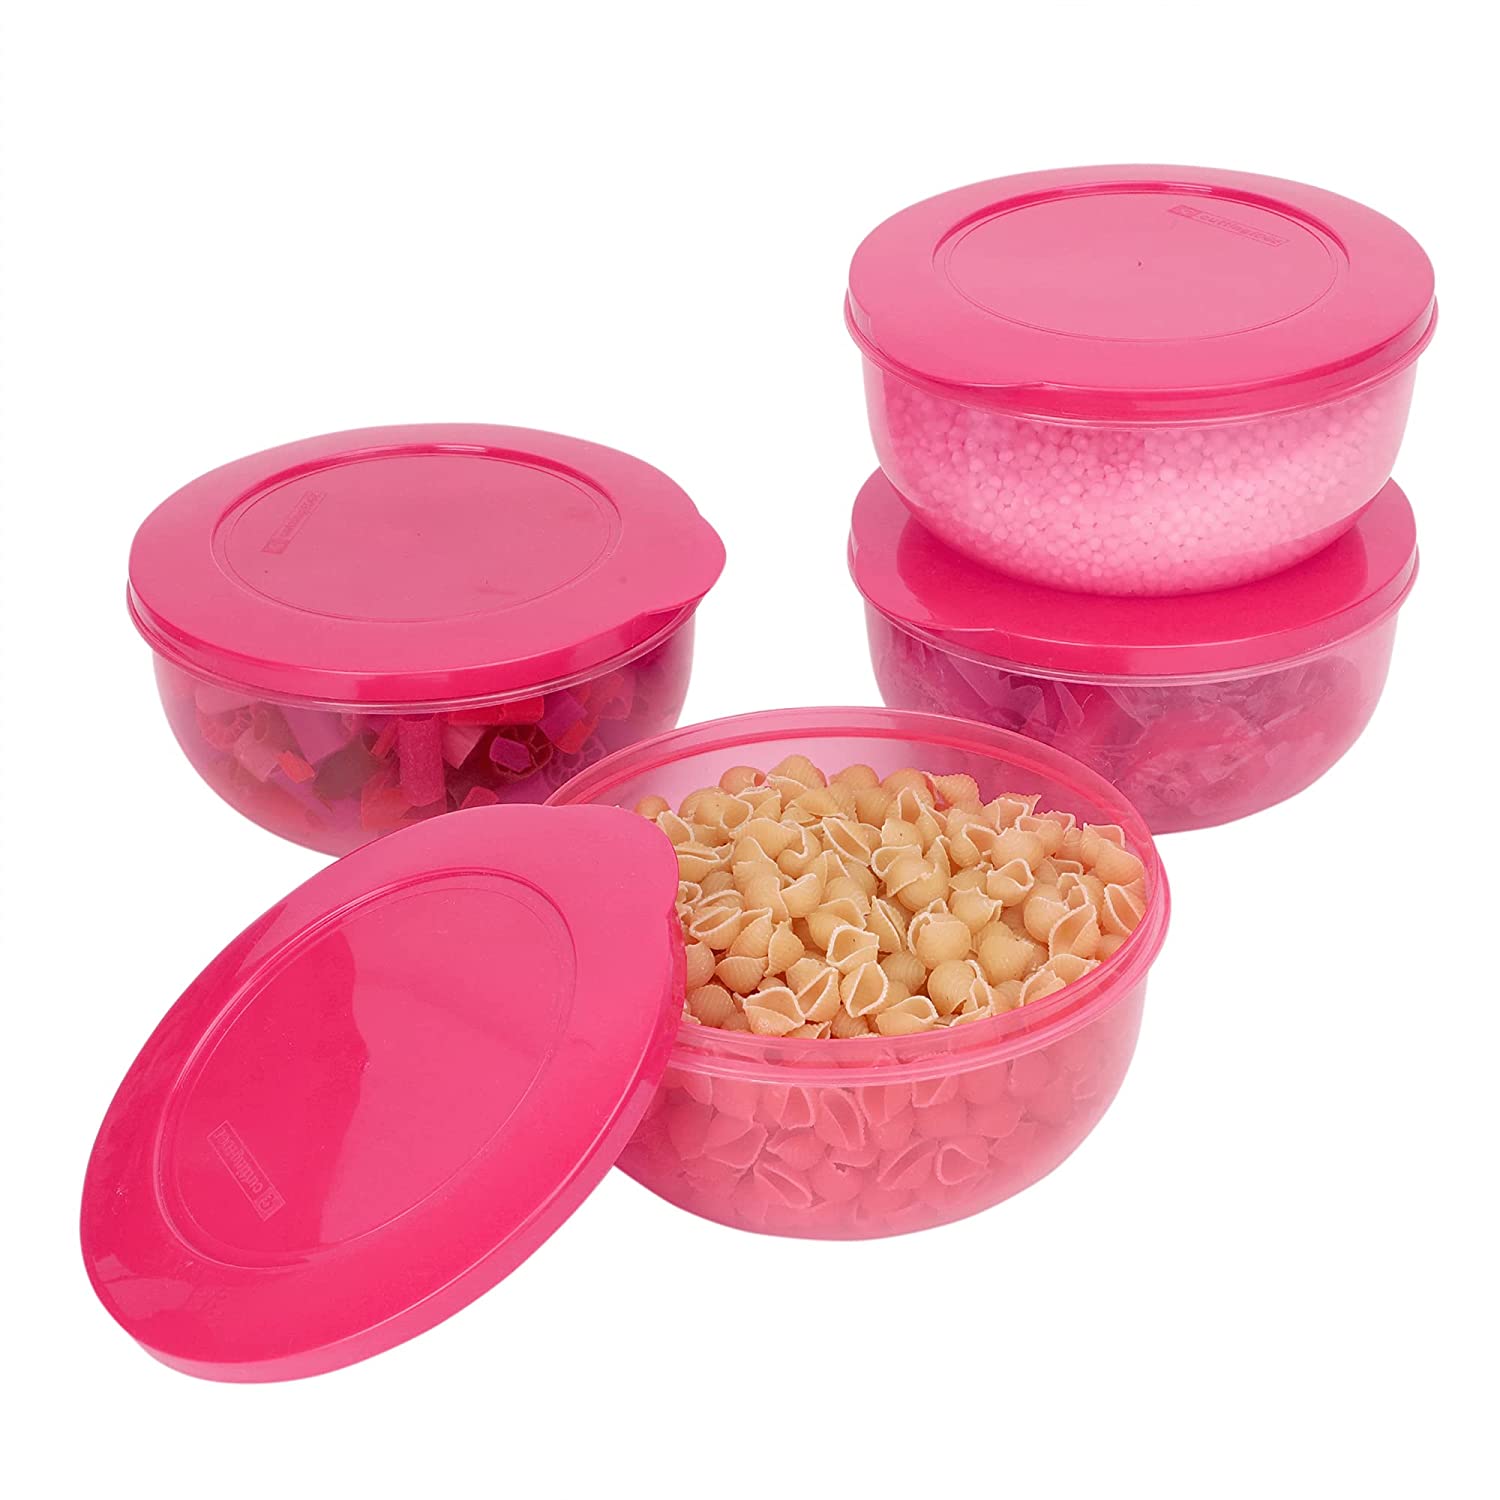 Cutting EDGE Eco-Storage Plastic Container Set for Kitchen & Refrigerator, Set of 4